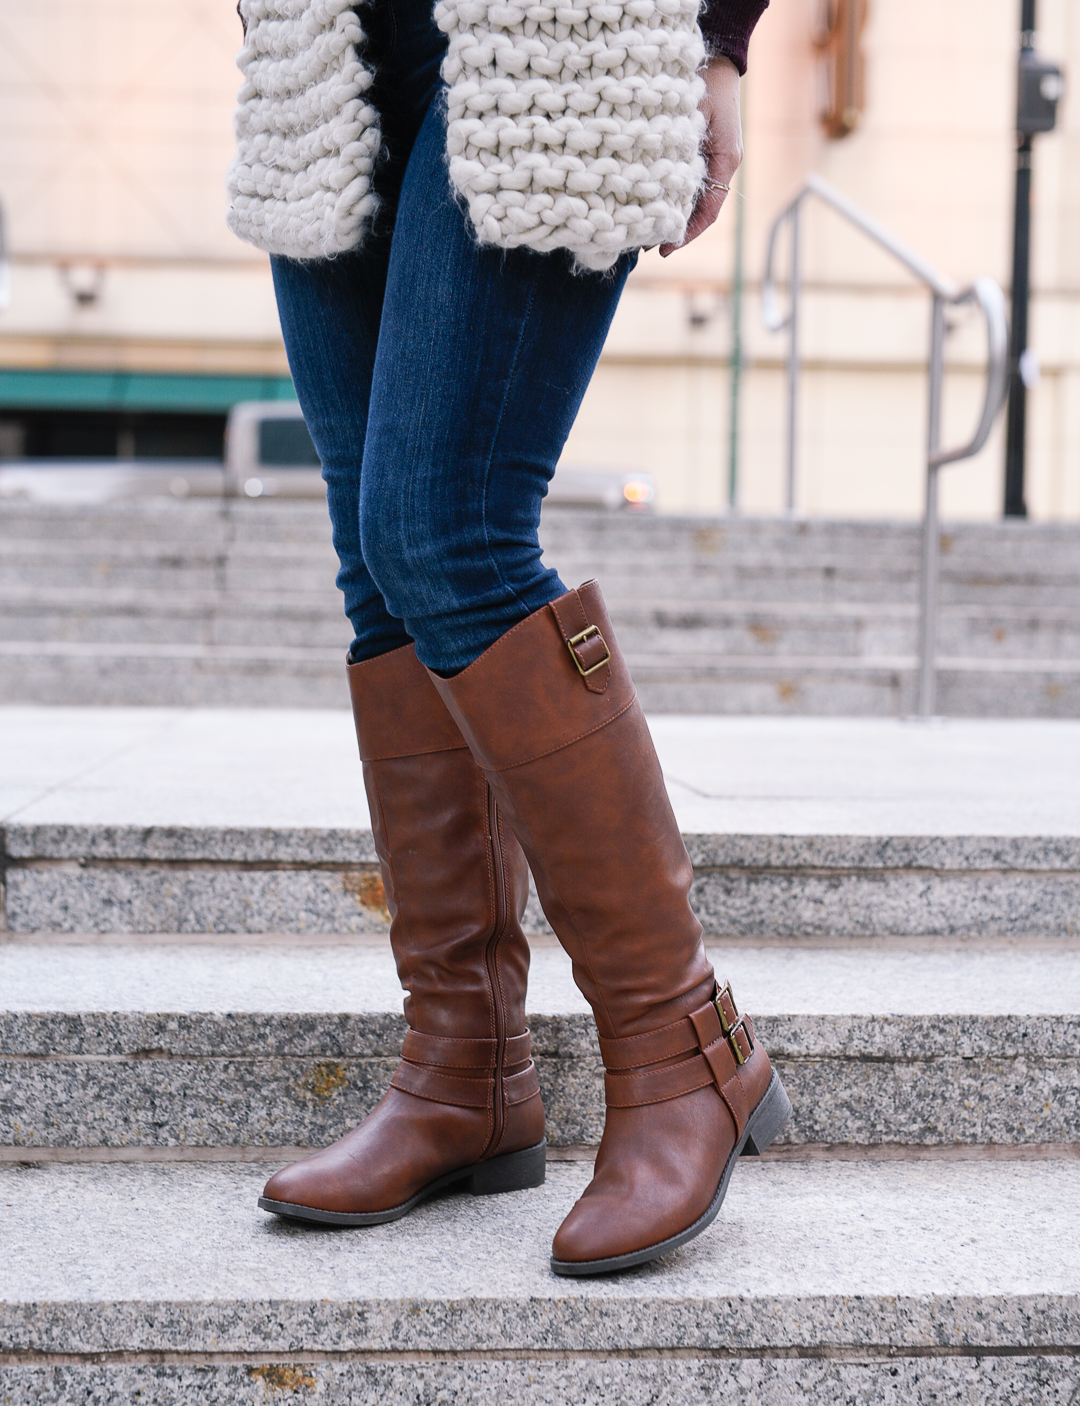 Payless riding boots in cognac for under $50. 